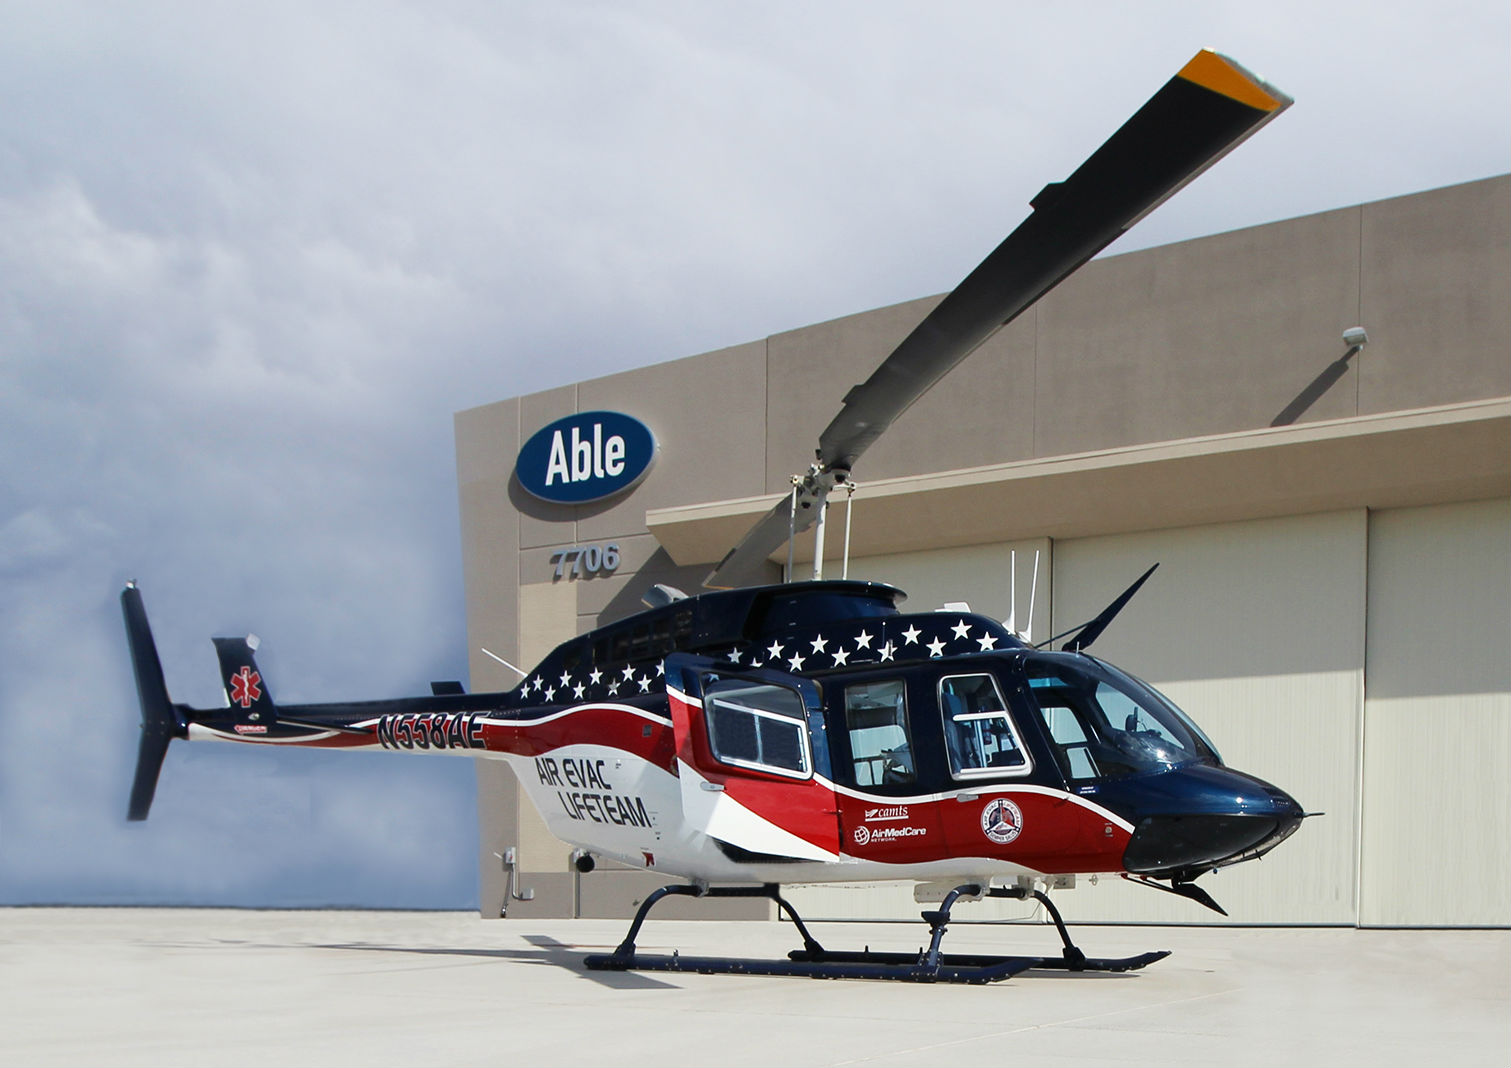 Under the contract, Able will be the exclusive service provider for component repair and overhaul services for Air Evac Lifeteam's fleet of 128 Bell 206 aircraft. Able Aerospace Photo